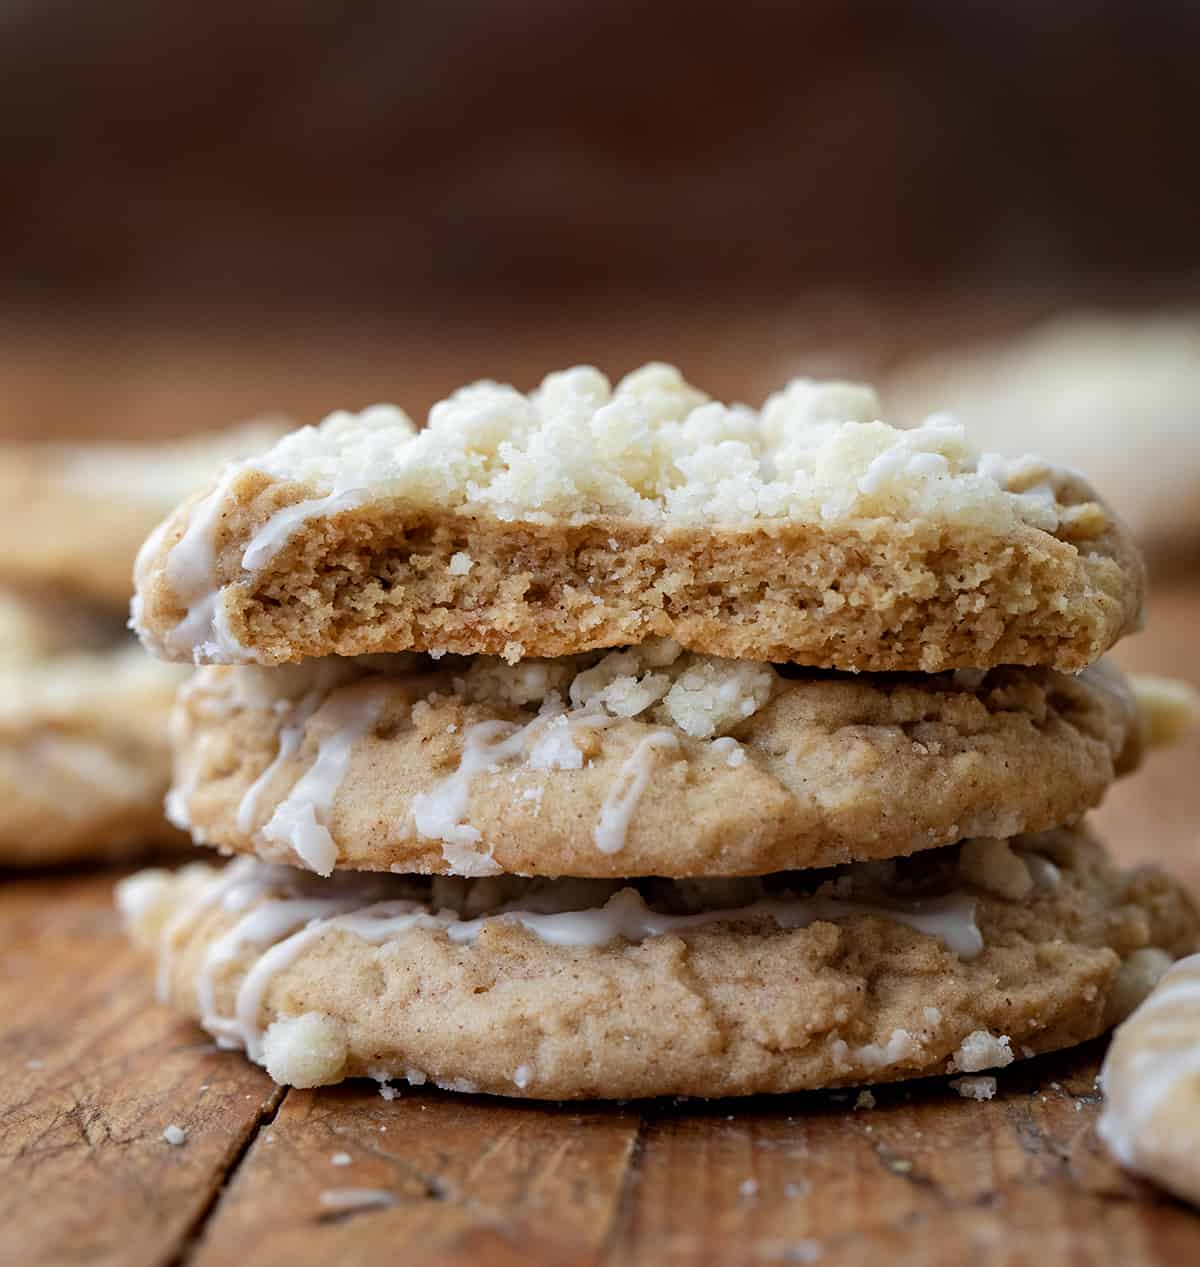 Stack of Coffee Cake Cookies with top cookie havled showing inside texture.